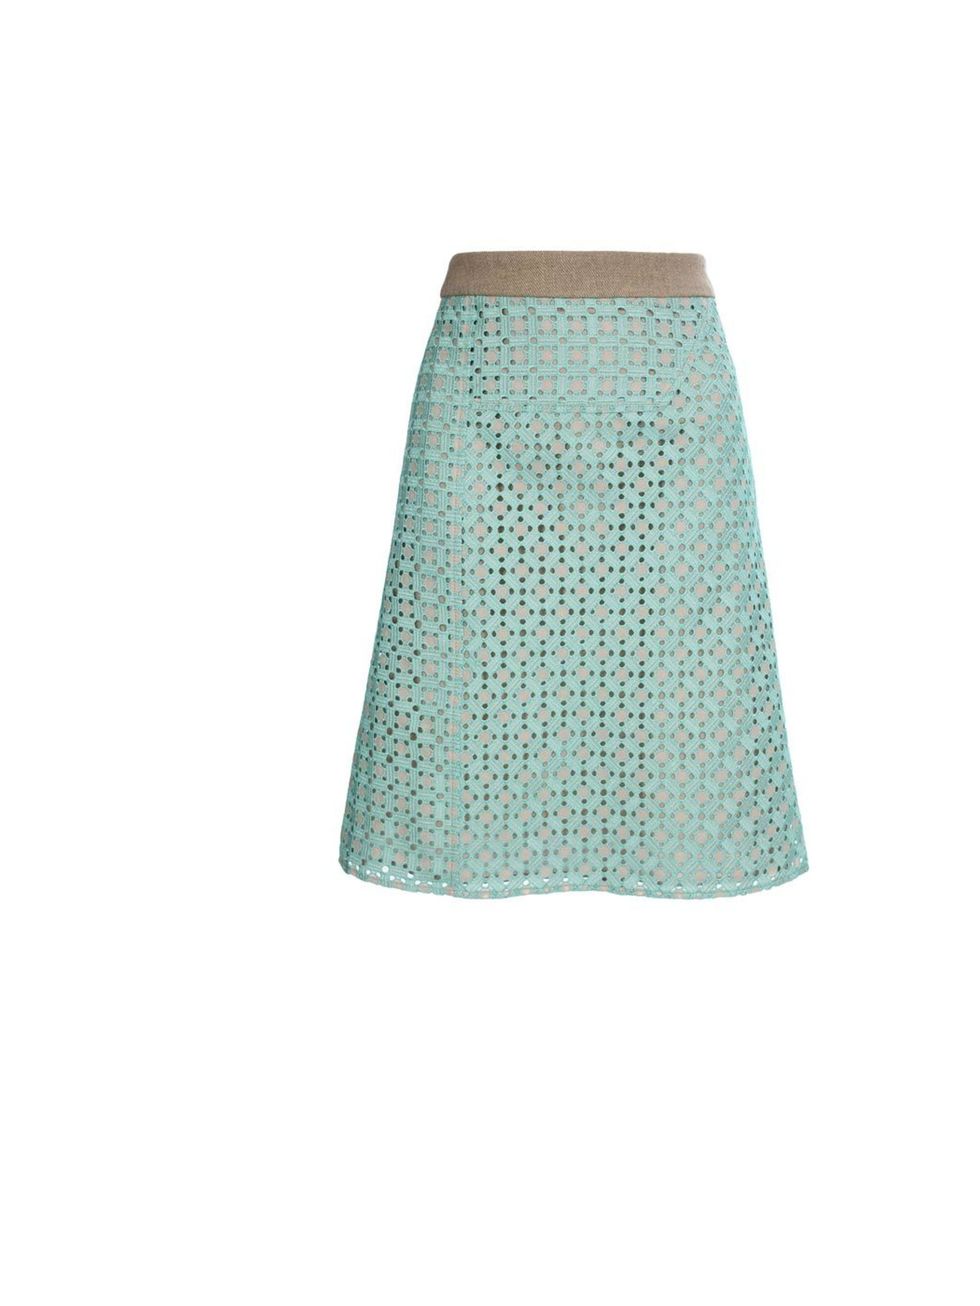 <p>Derek Lam embroided skirt, £780, at <a href="http://www.brownsfashion.com/Product/Exclusive_Embroidered_and_perforated_skirt/Product.aspx?p=3615349">Browns Fashion</a></p>